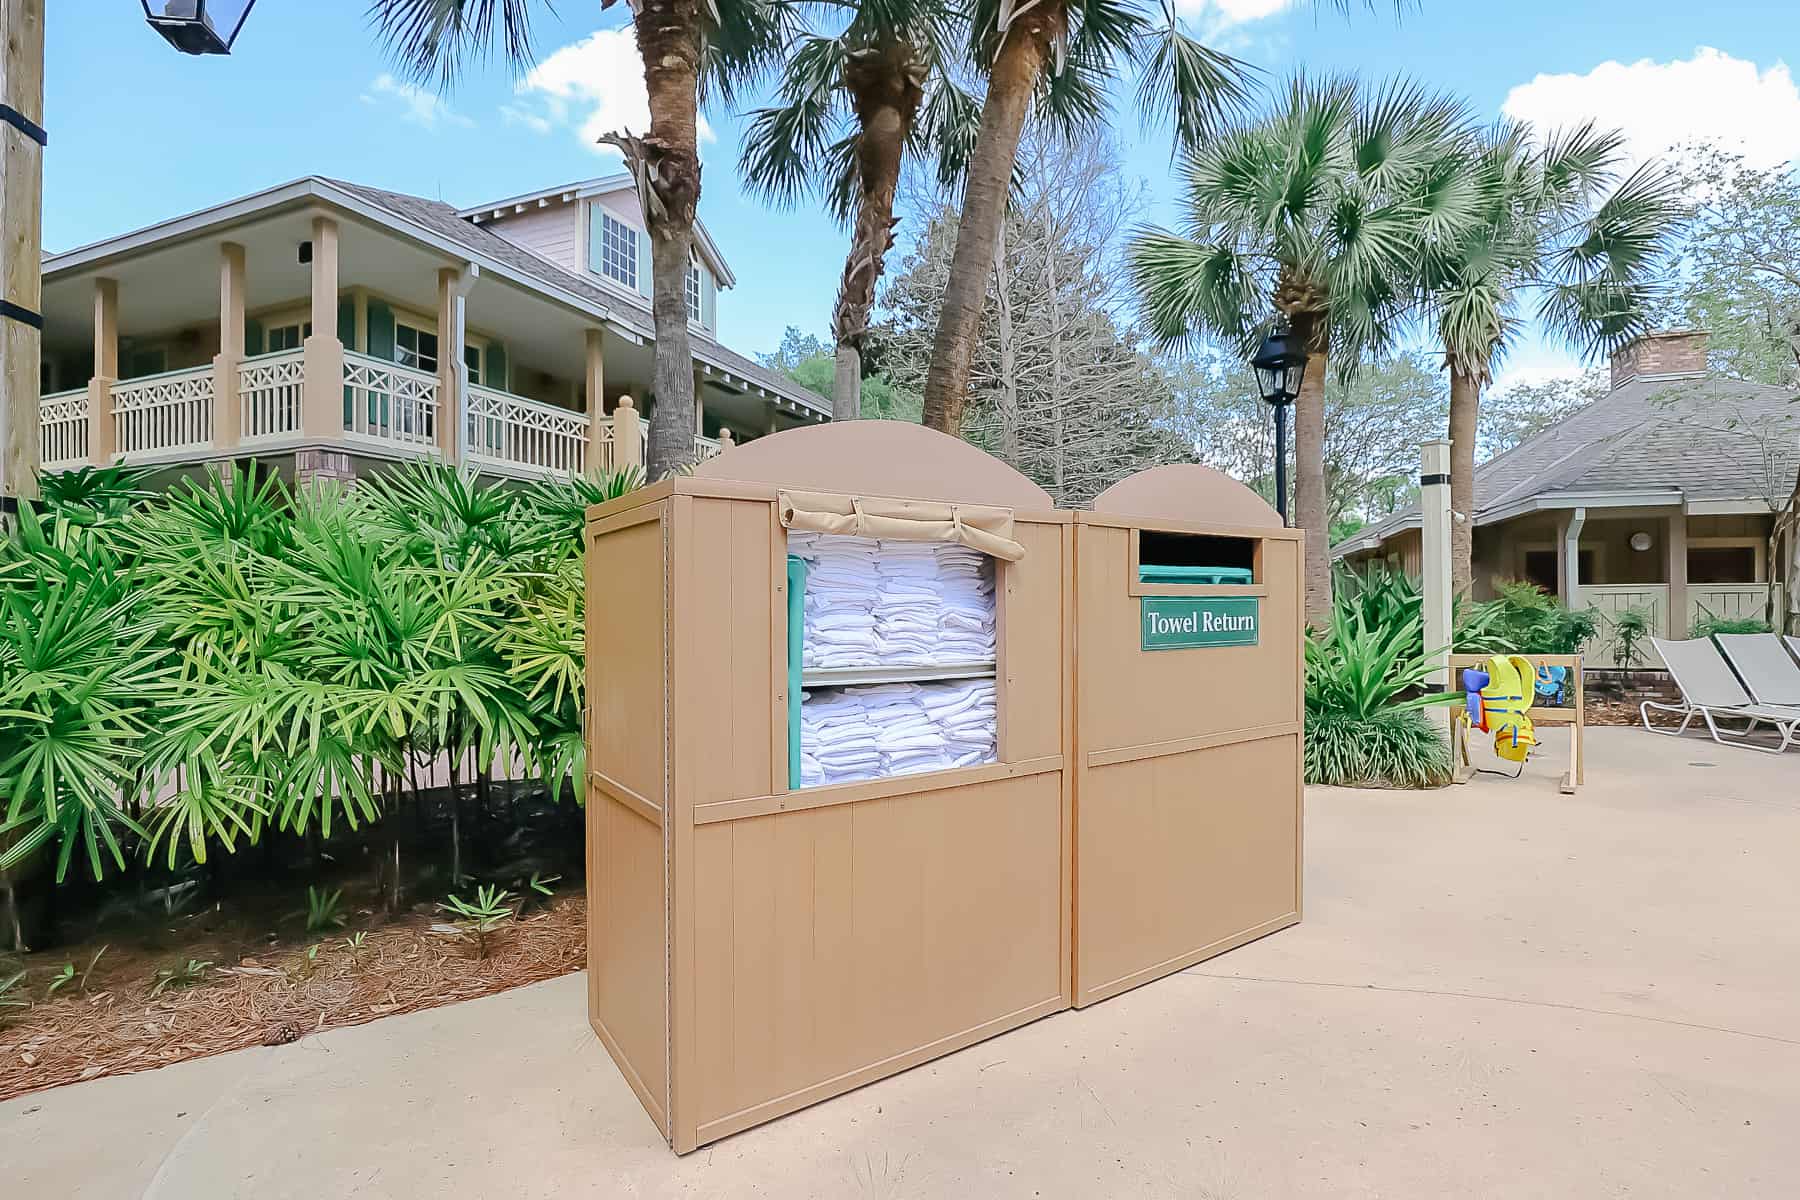 Complimentary Towels at Disney's Riverside Pool 